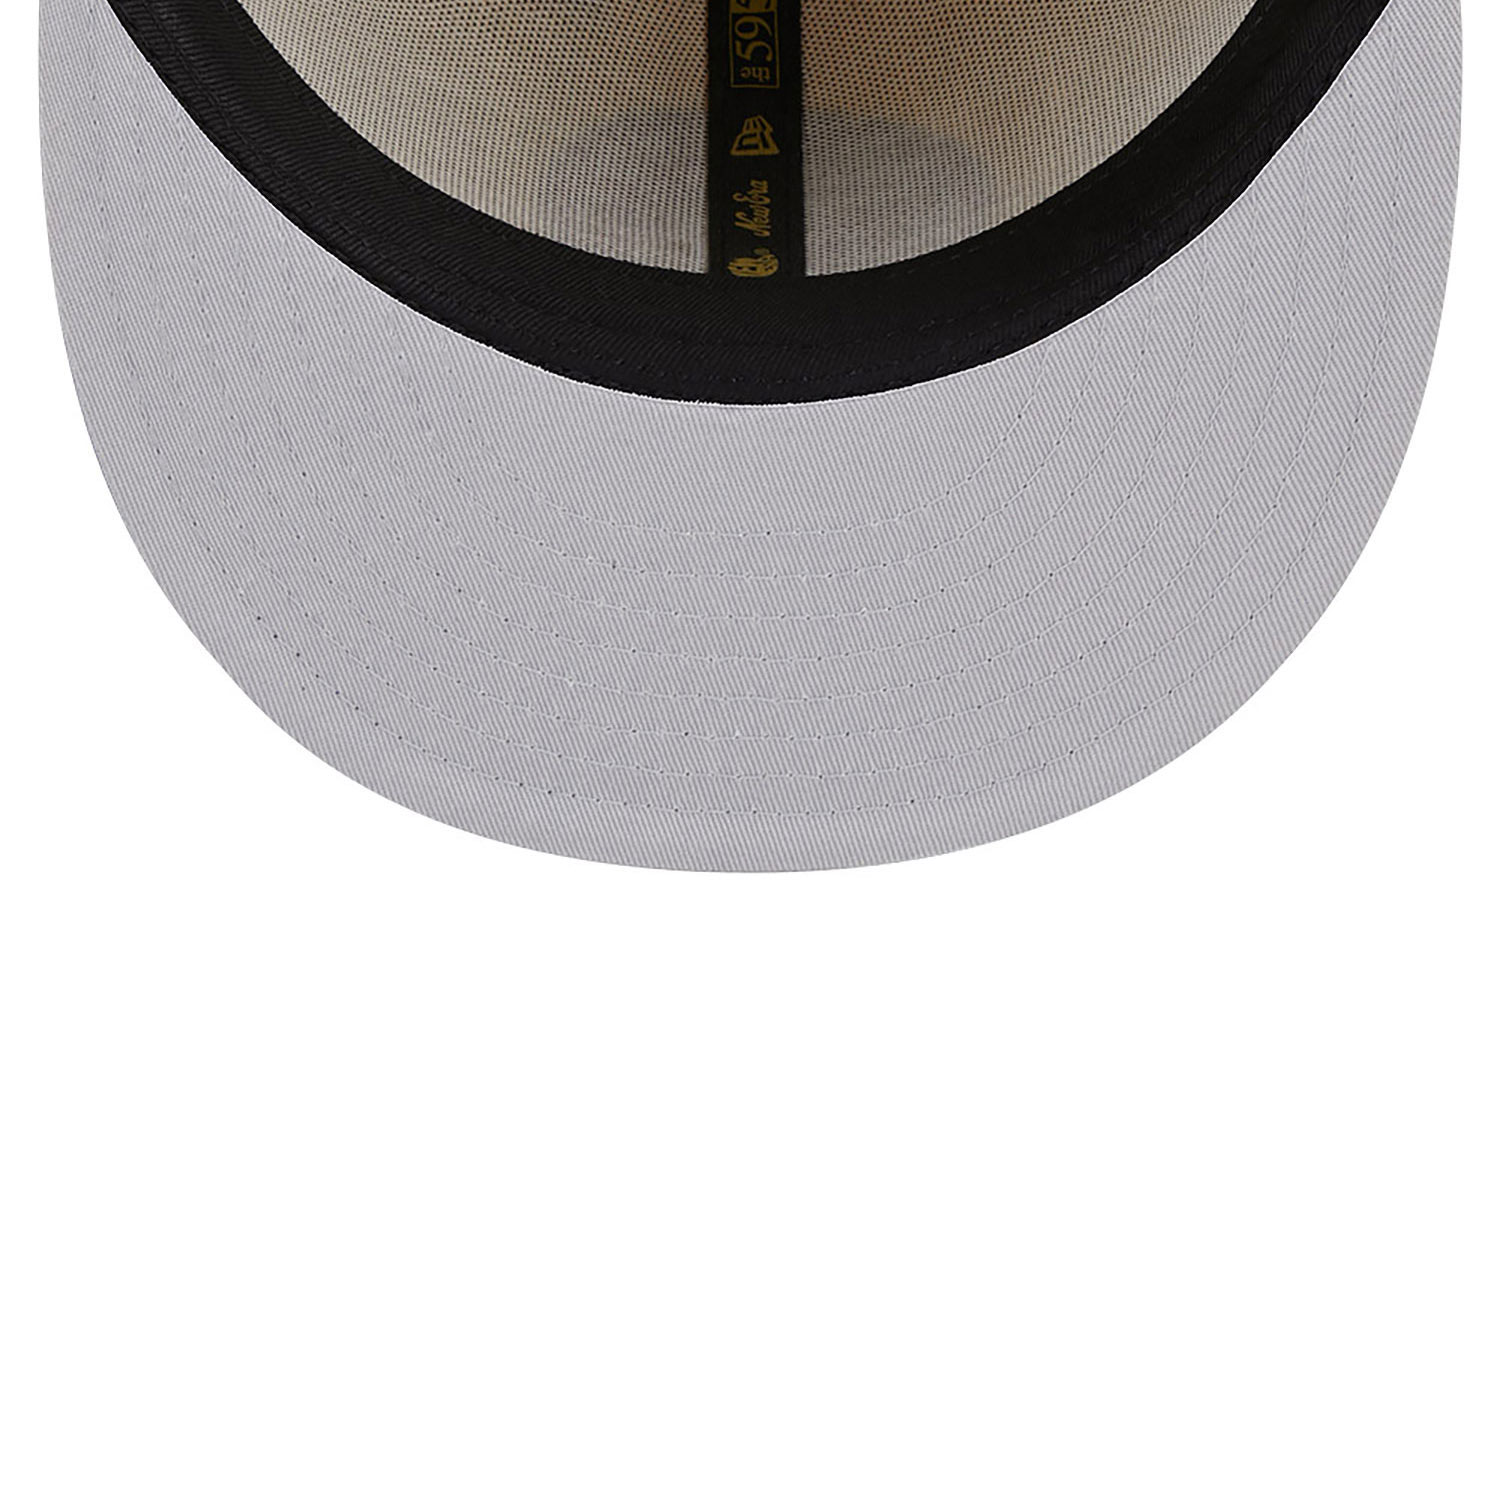 New Era 59FIFTY Day Dark Beige 59FIFTY Fitted Cap